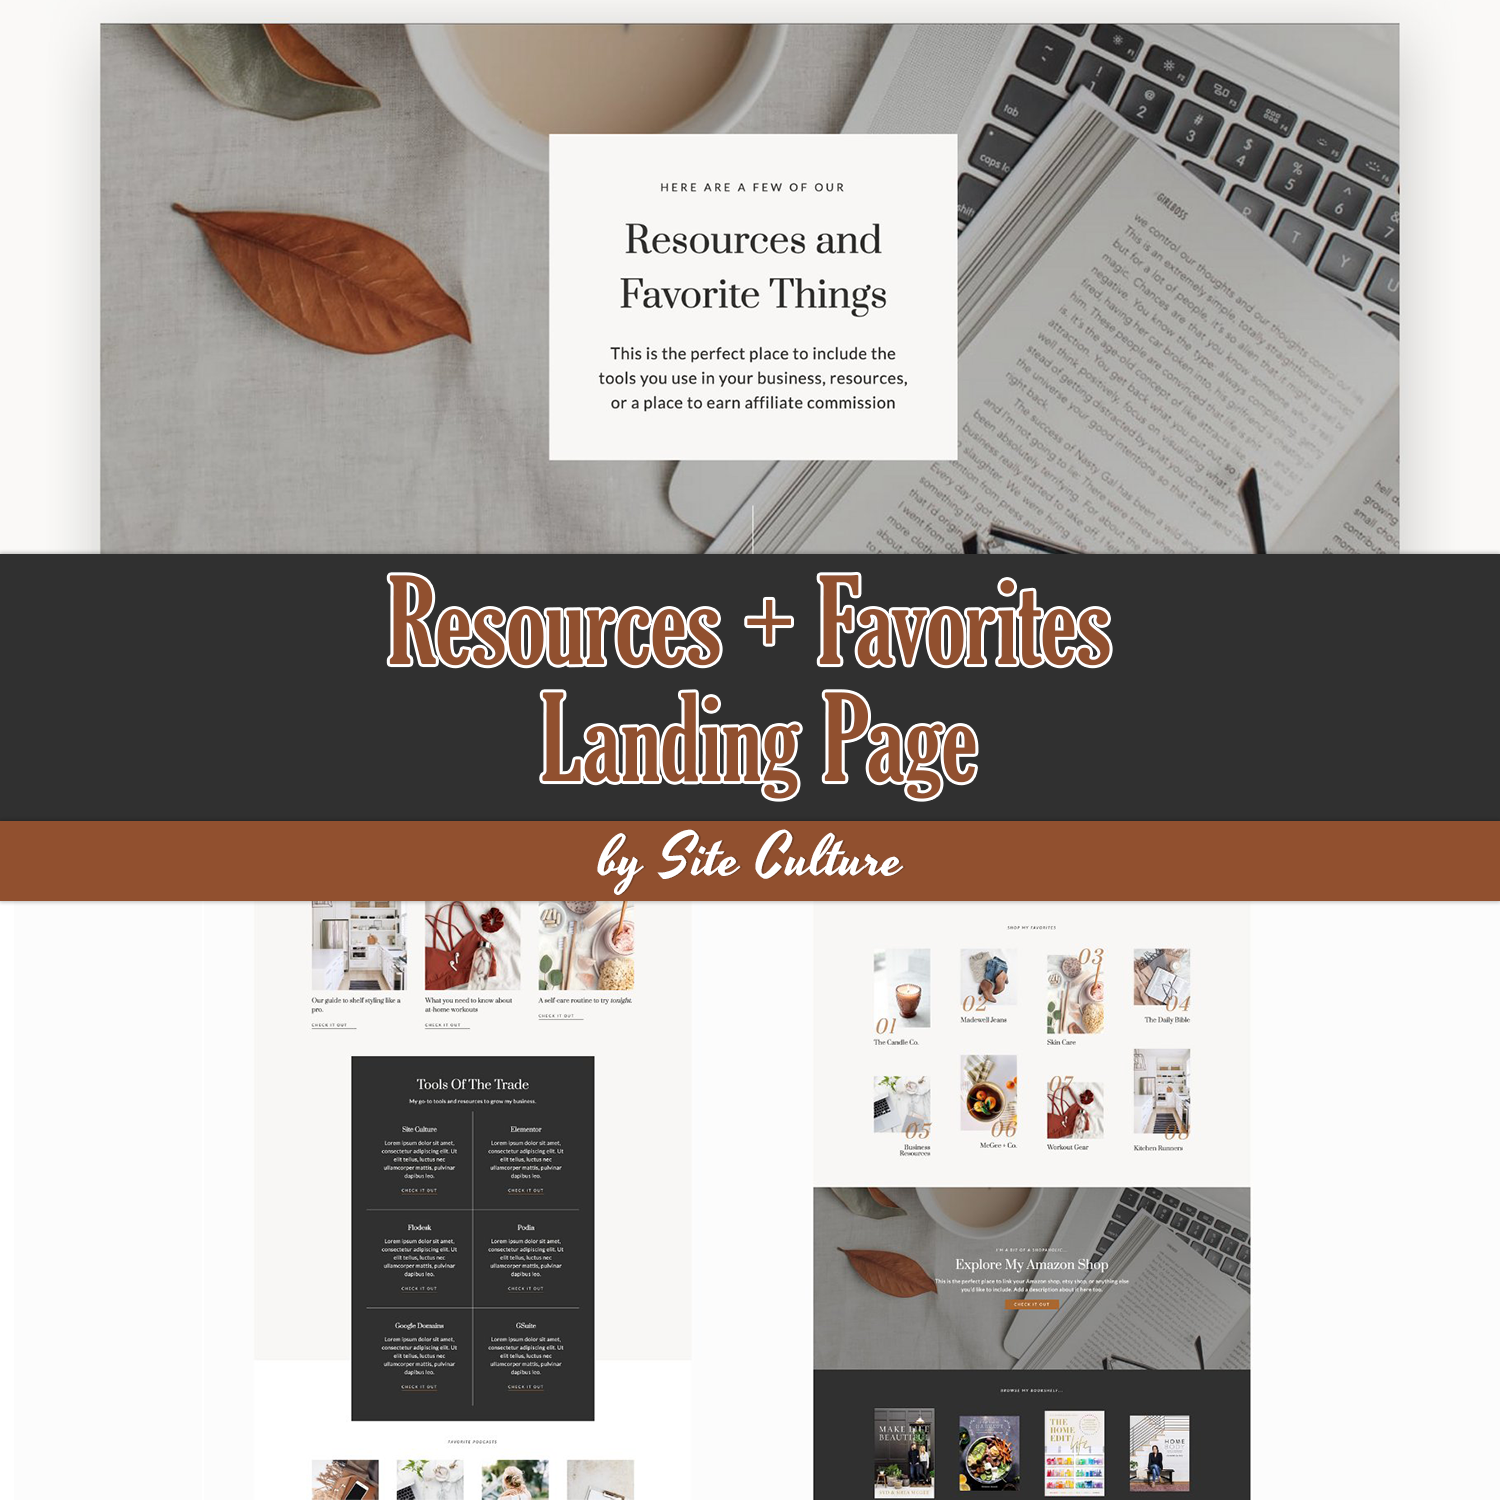 Preview resources favorites landing page.